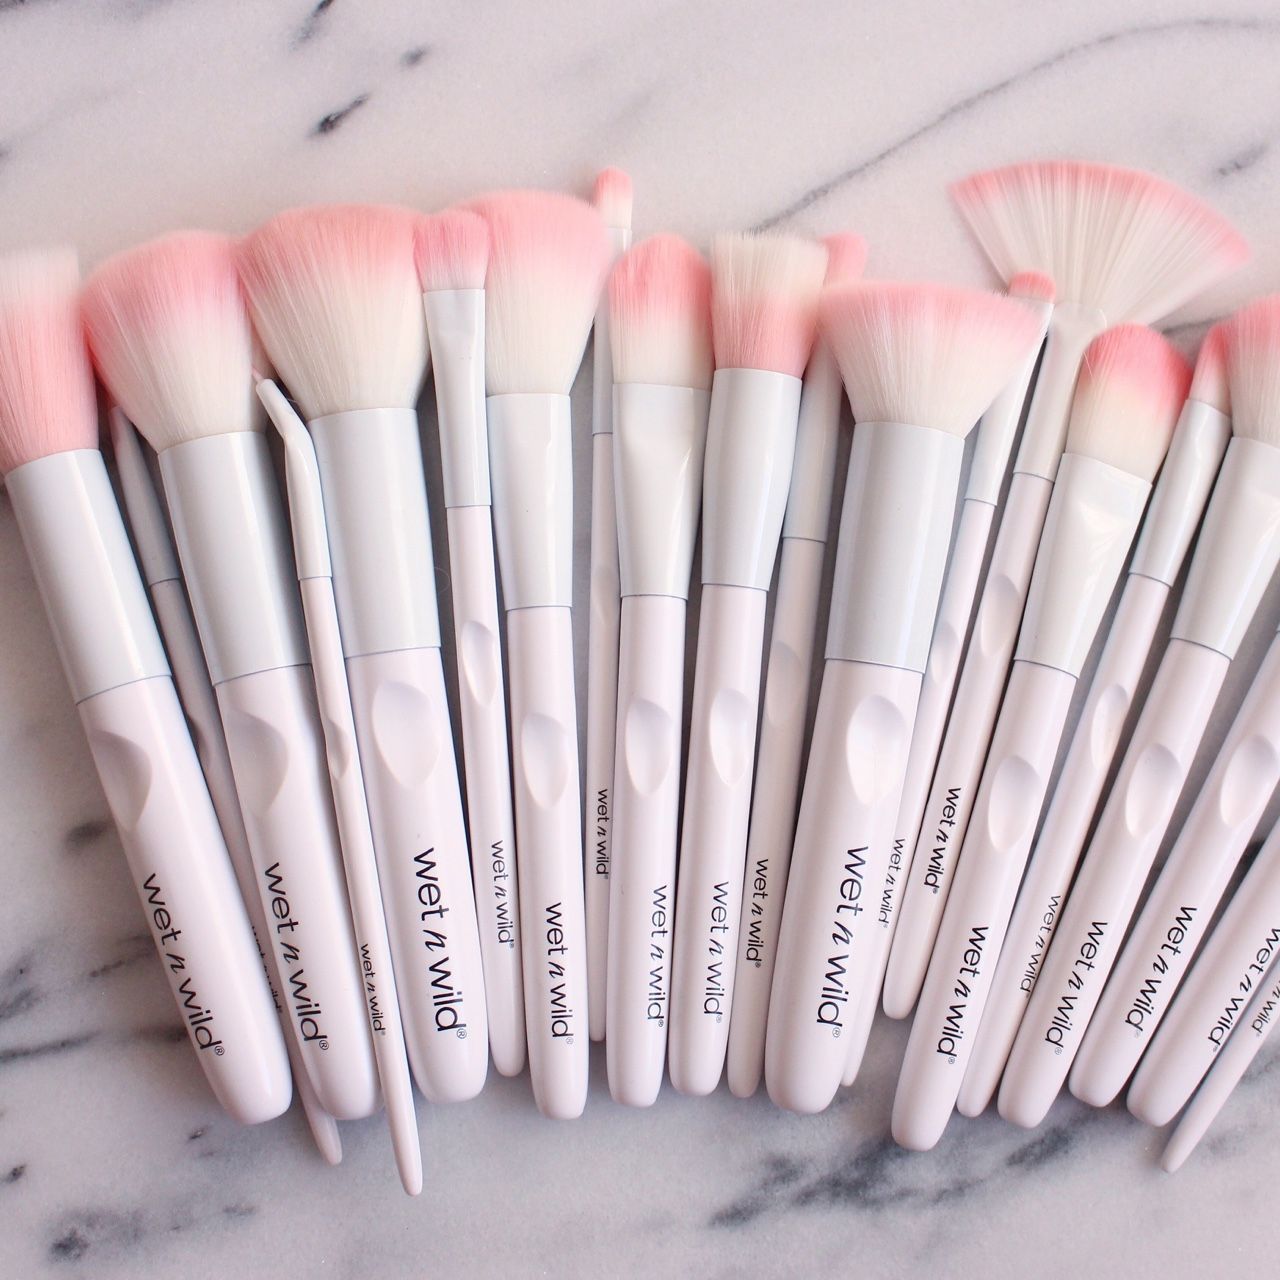 Sturdy, inexpensive, pastel pink and white makeup brush set by Wet ‘n Wild #brushc